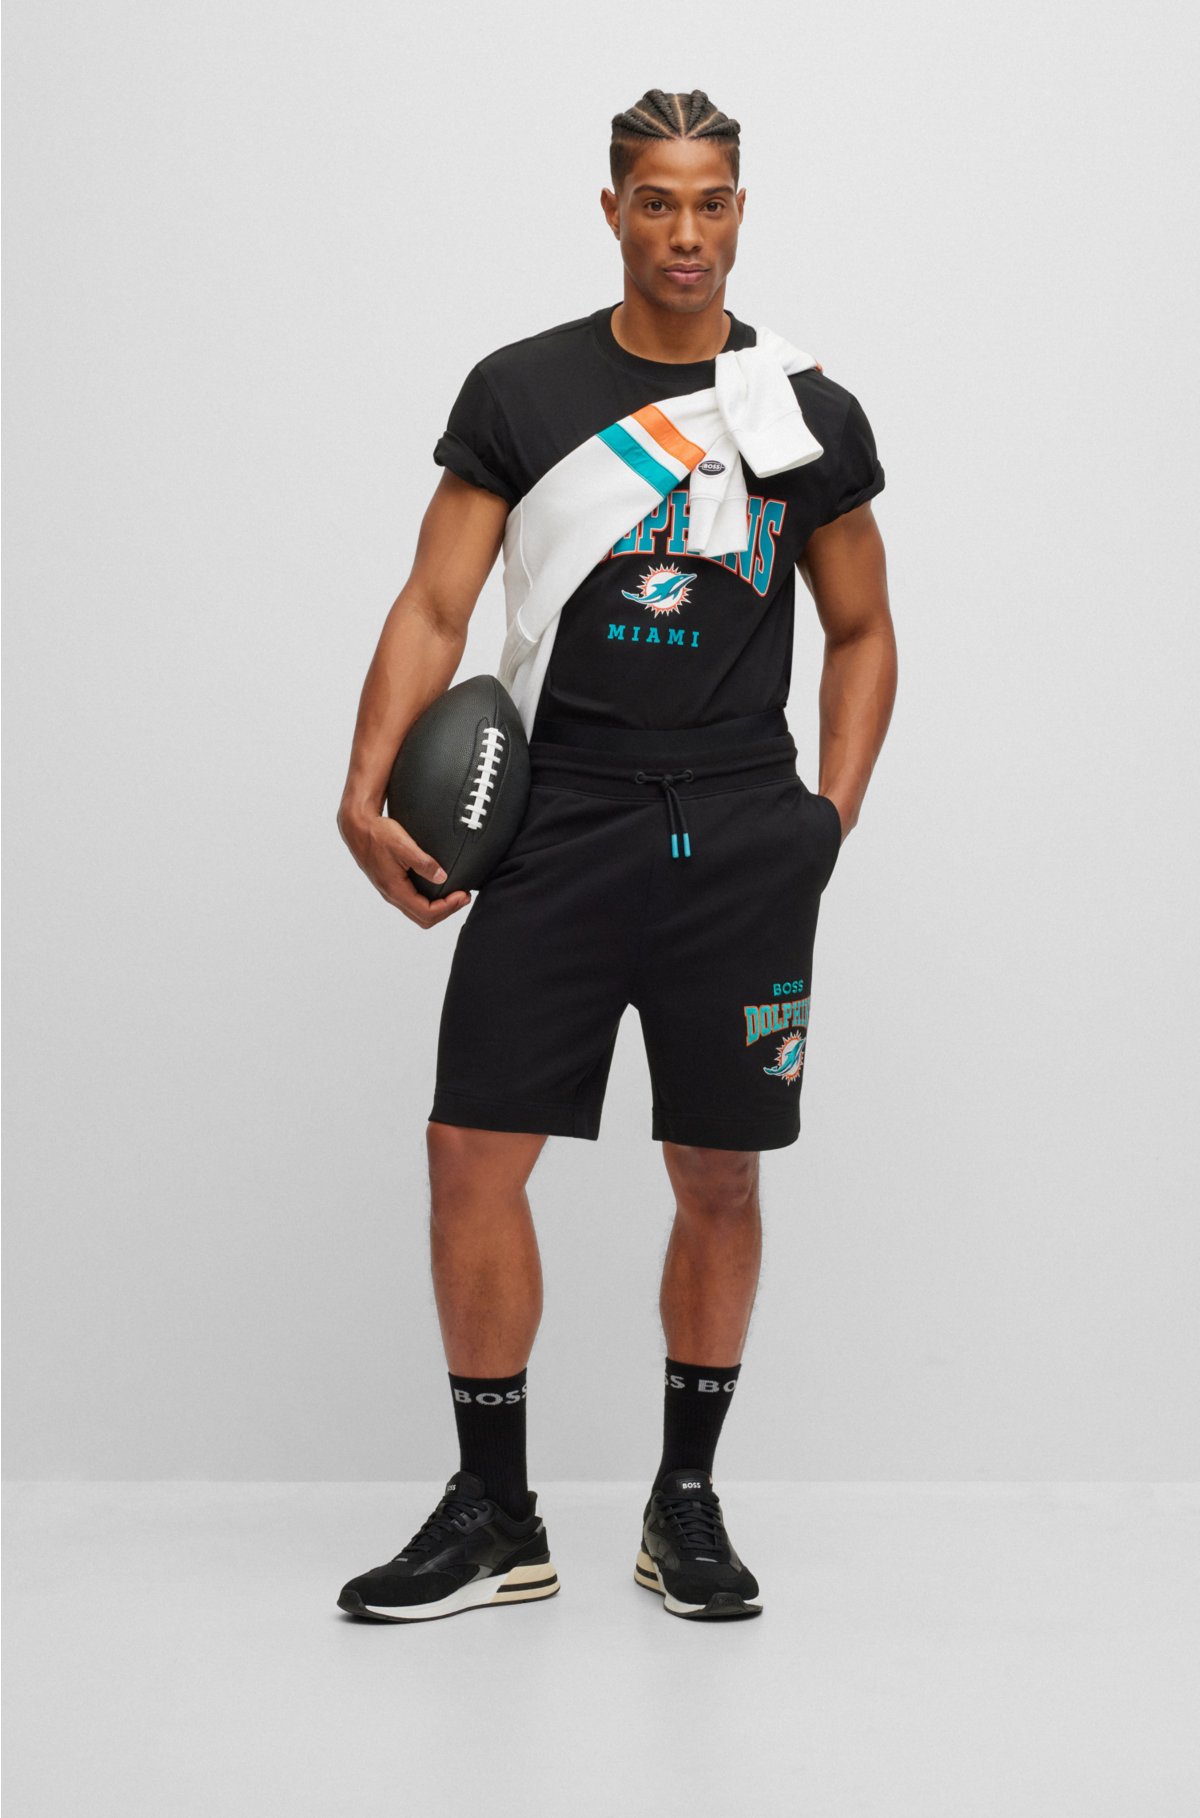 BOSS x NFL cotton-terry shorts with collaborative branding, Dolphins